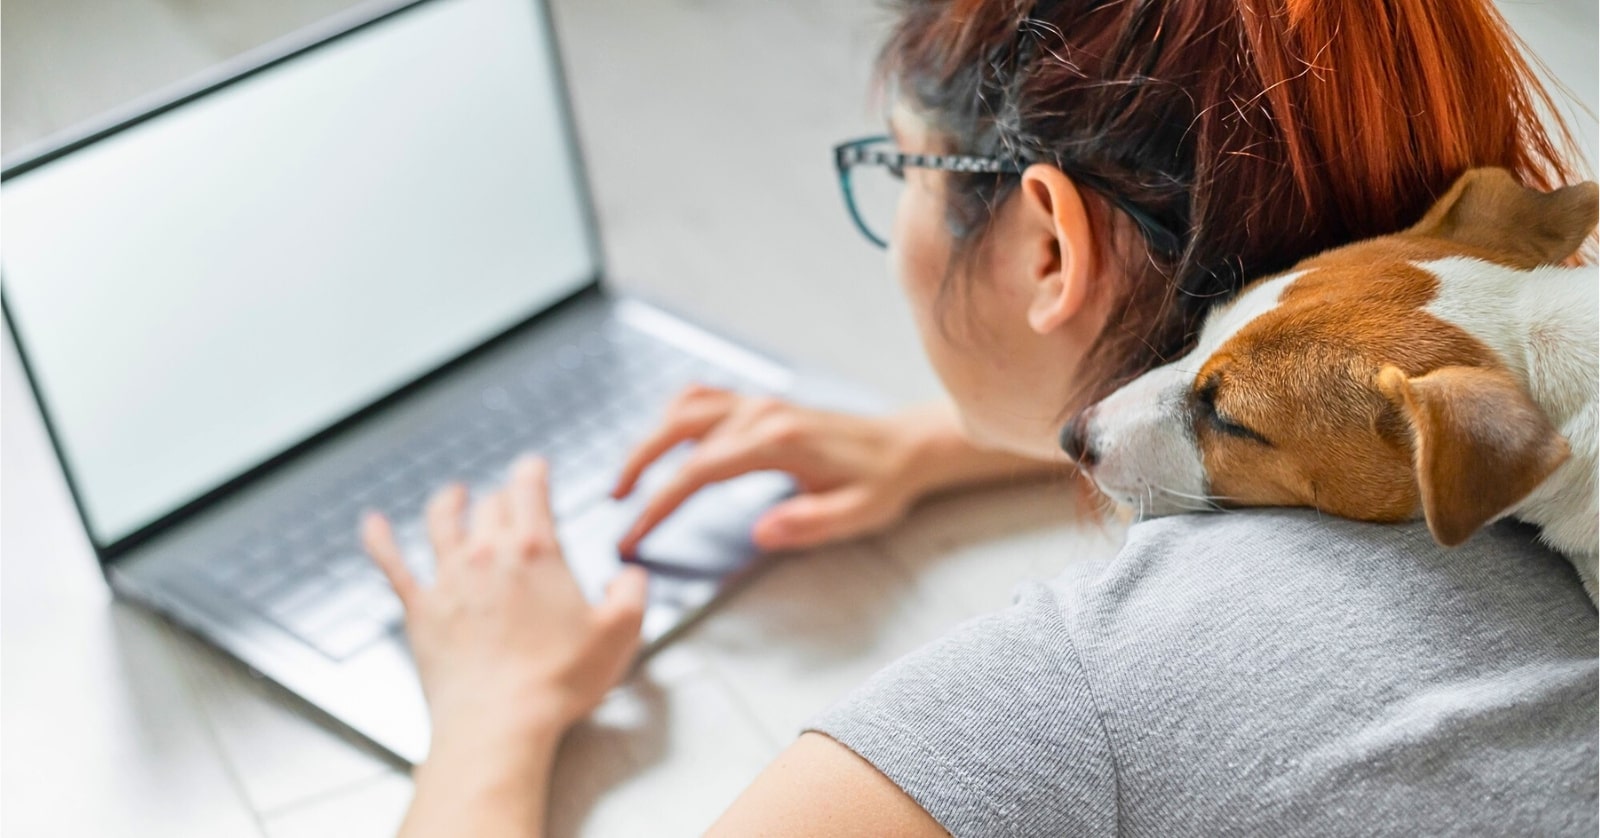 young woman with red hair laying on floor working on her laptop while her small dog sits on her back